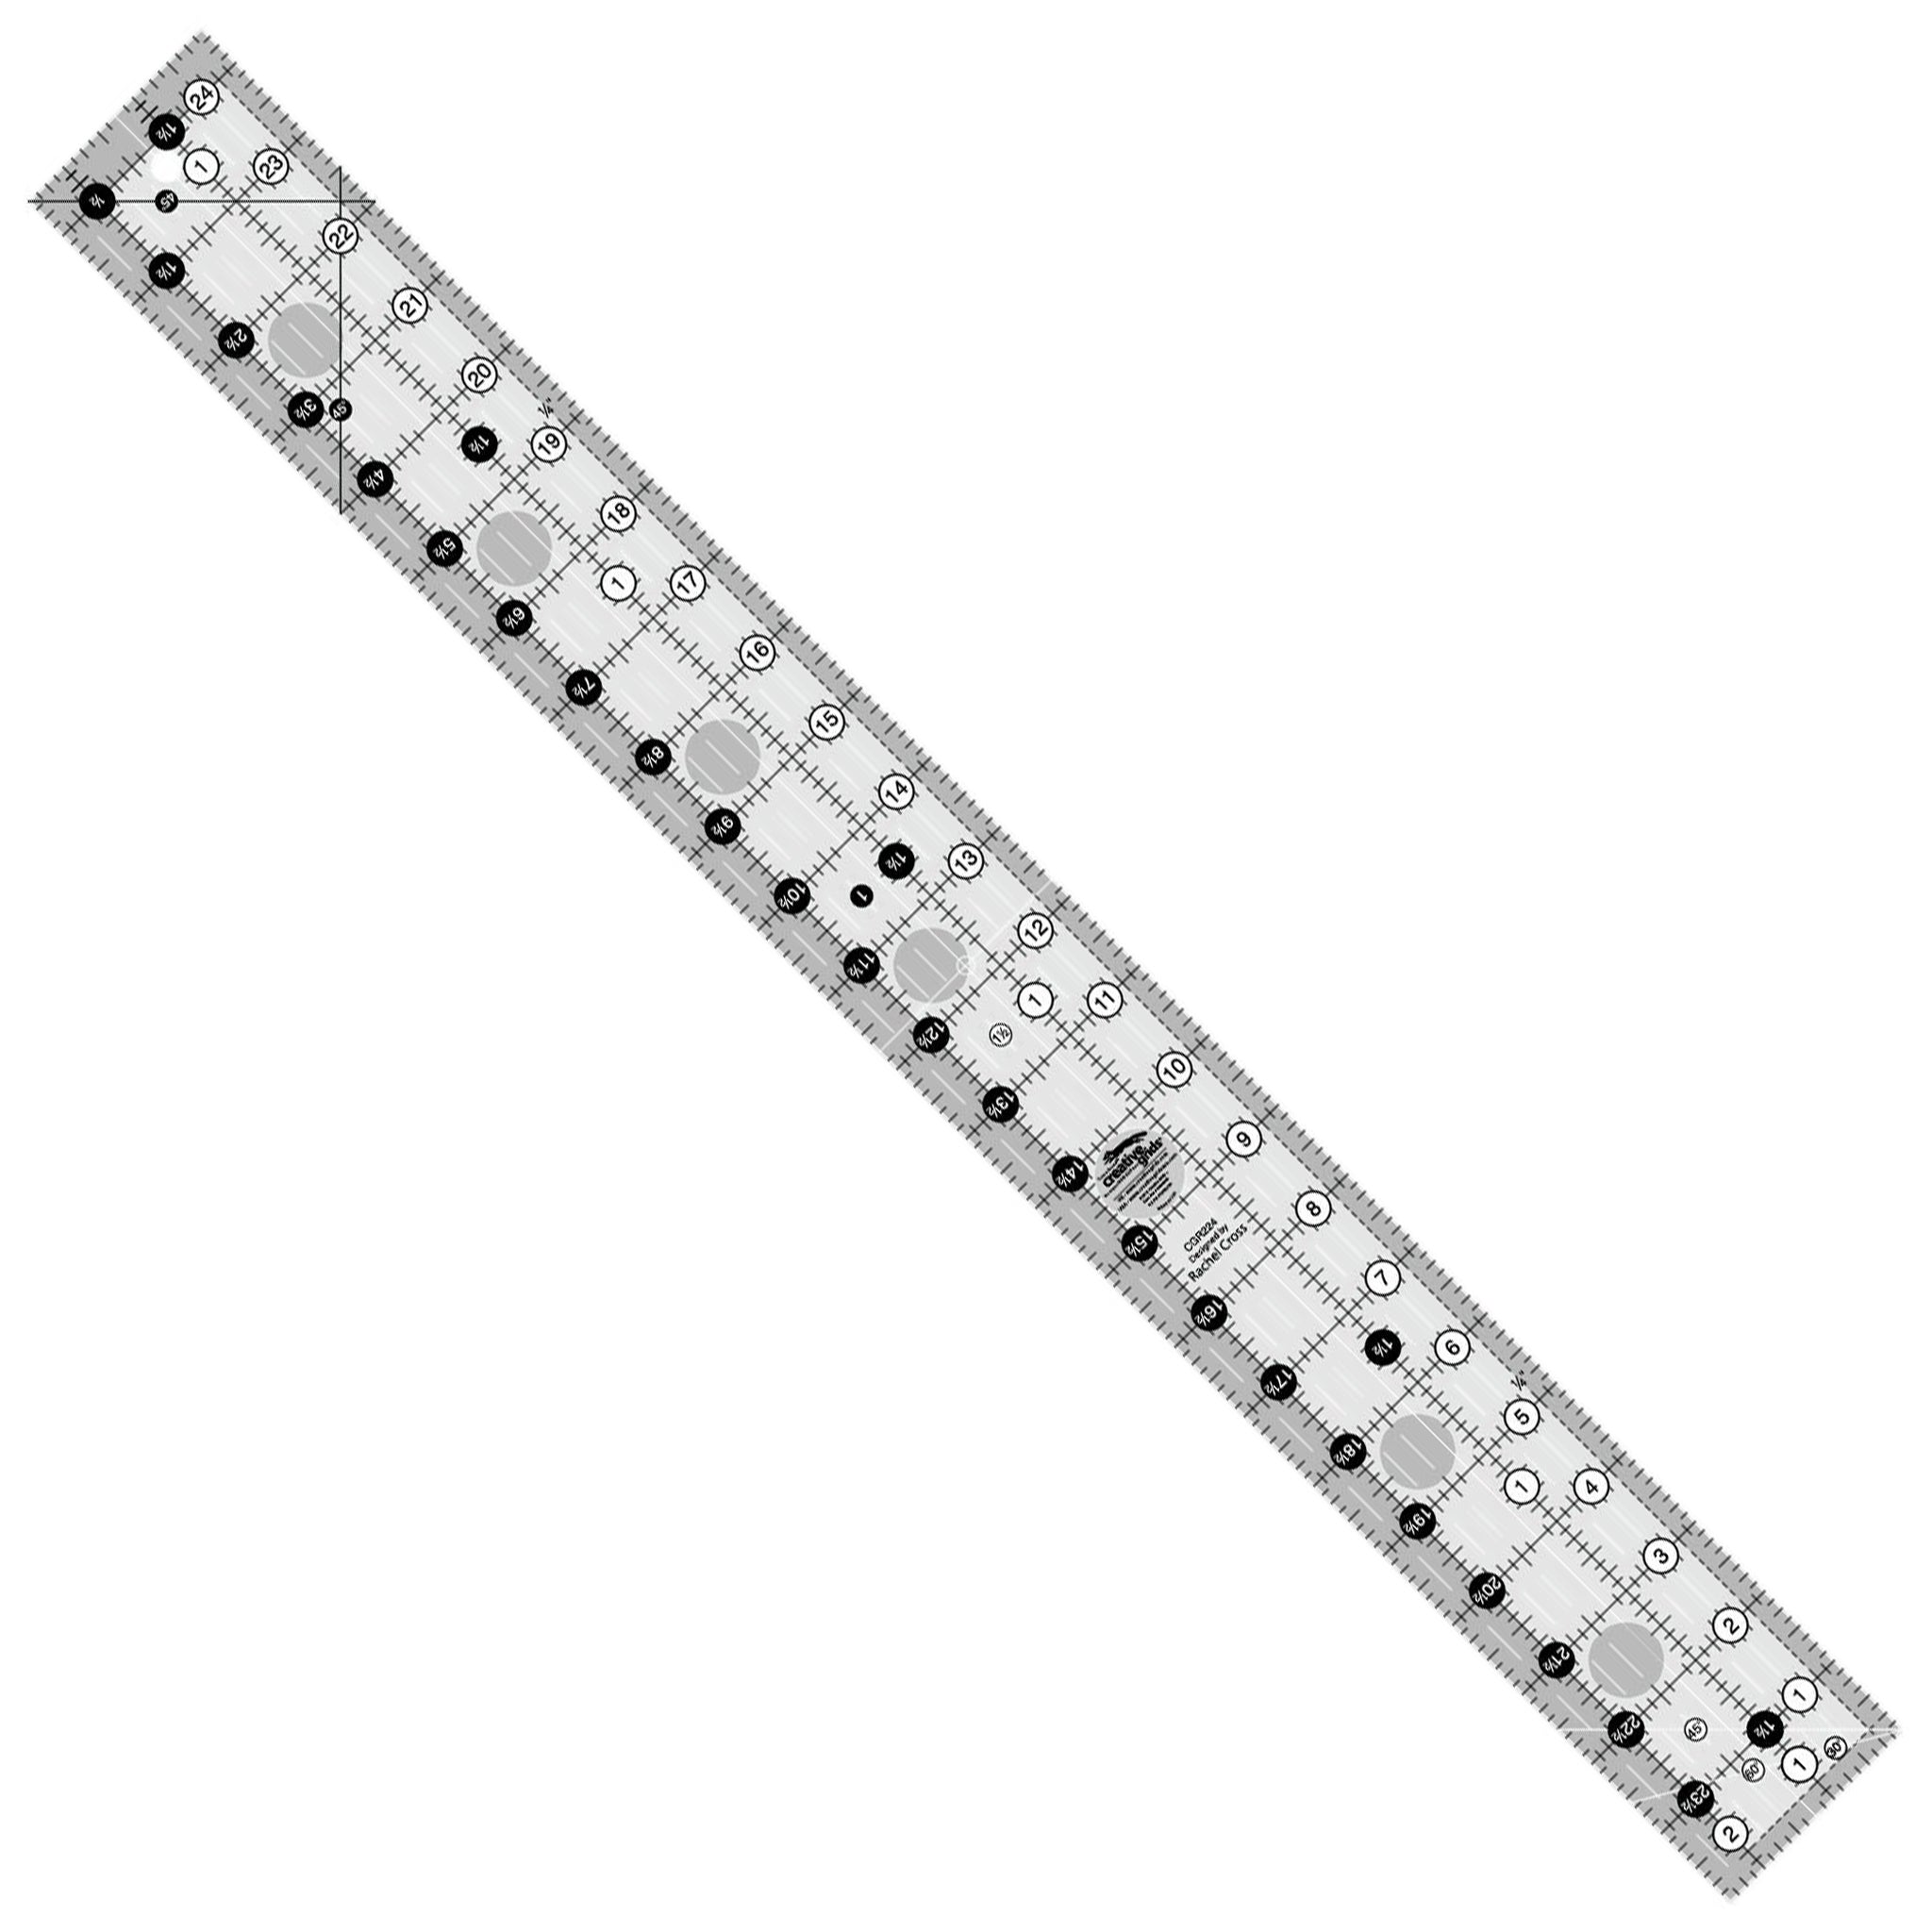 Creative Grids Quilting Ruler 2 1/2 Inch X 24 1/2 Inch (CGR224)